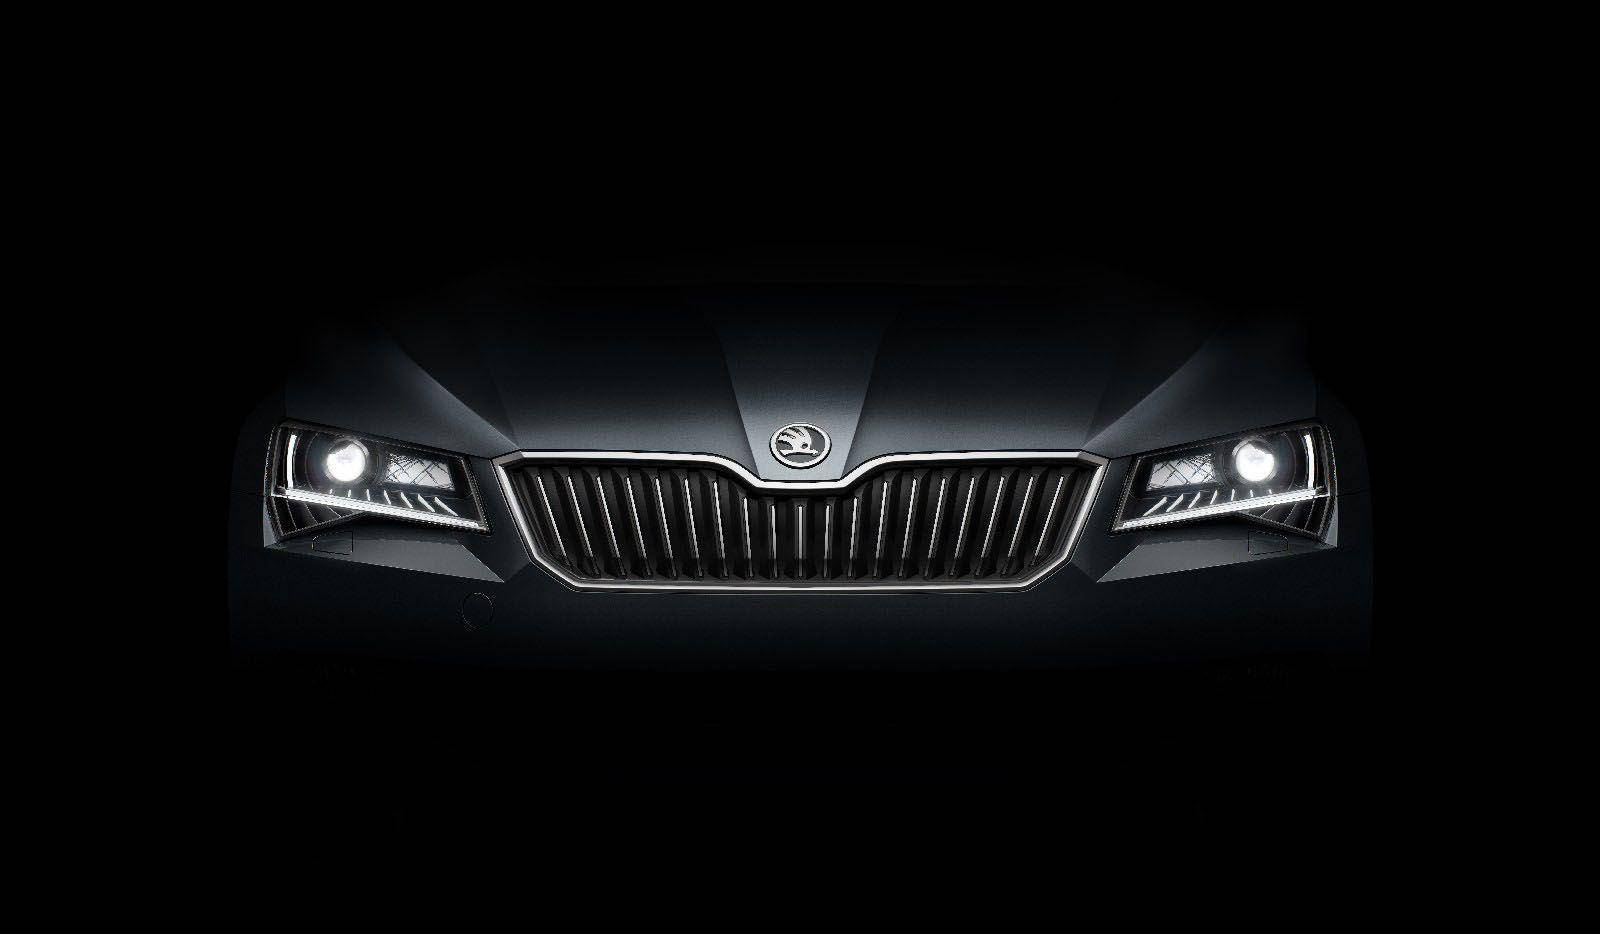 Feel The Exhilaration Of The Open Road In A Skoda Wallpaper